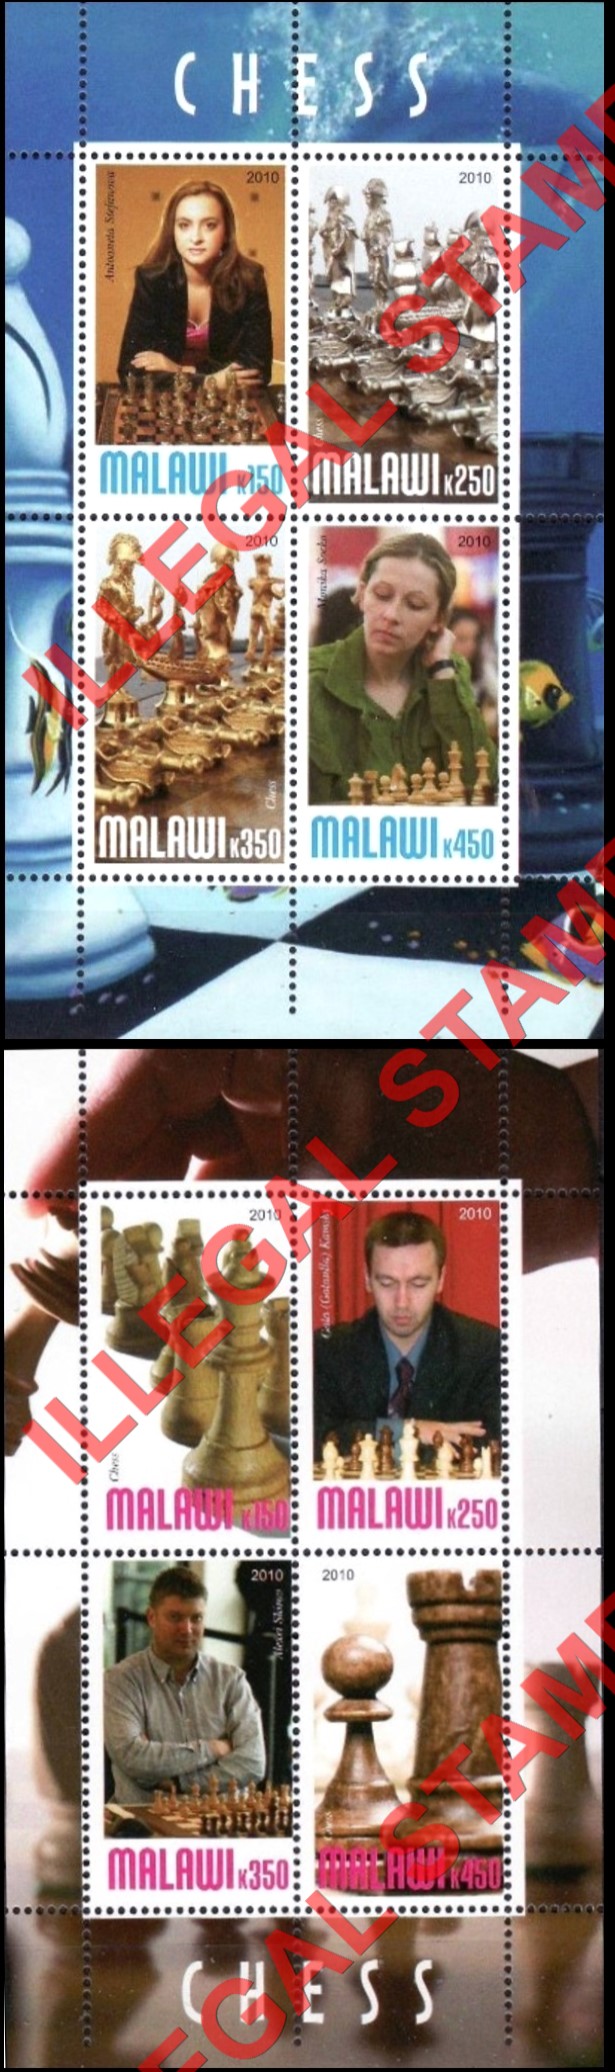 Malawi 2010 Chess Illegal Stamp Souvenir Sheets of 4